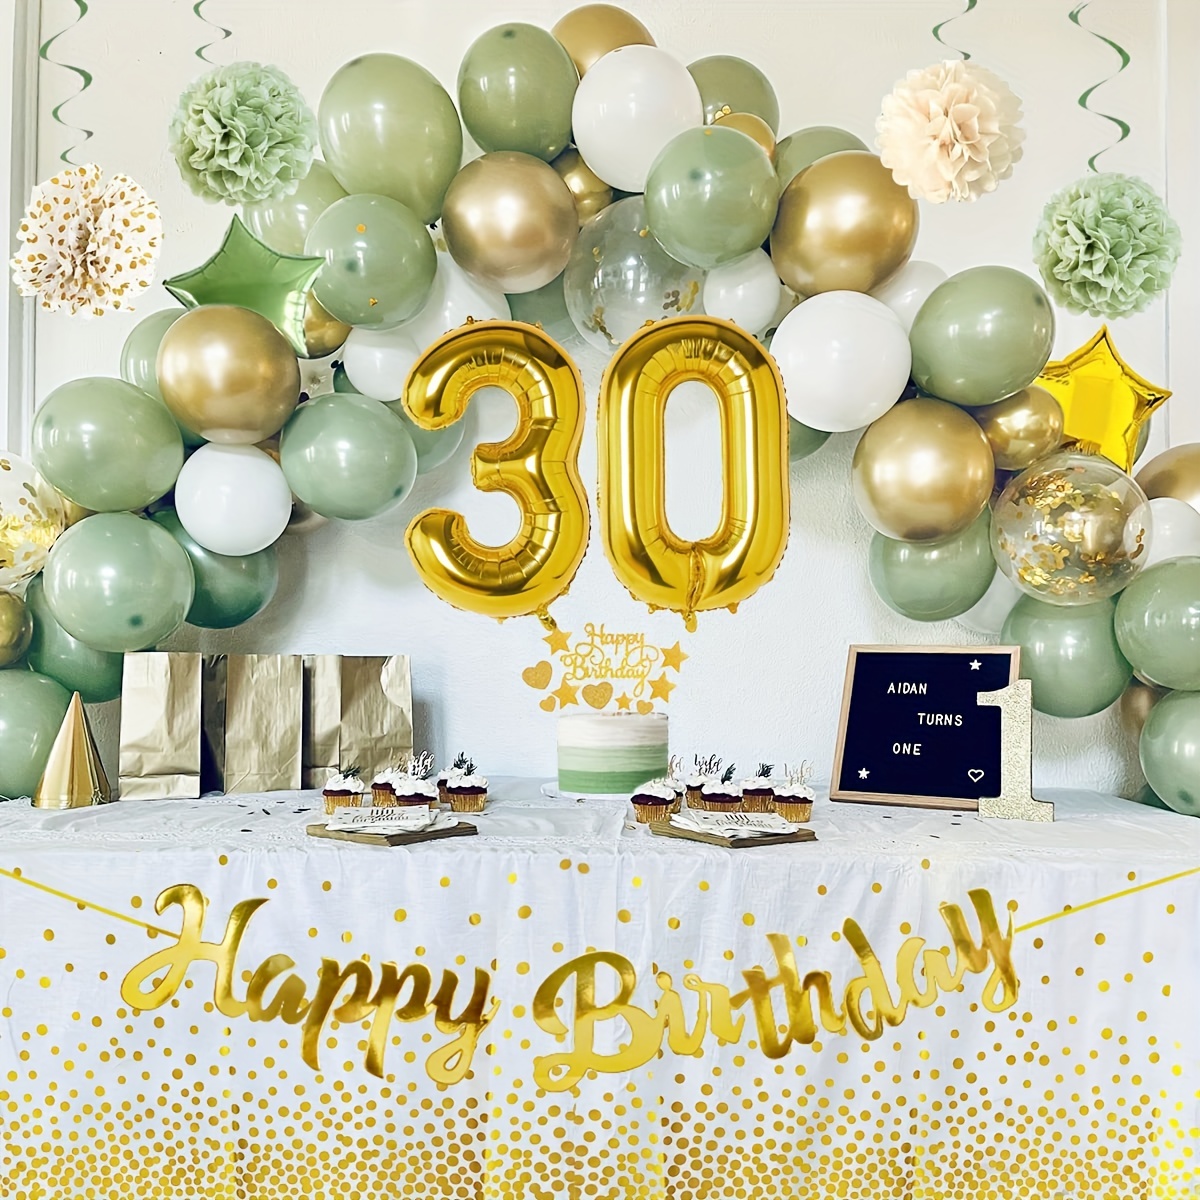 Birthday Decorations for Men Women, Black and Gold Party Decorations, Happy  Birthday Banner with Black Gold Balloons Tablecloth Pom Poms Confetti Foil